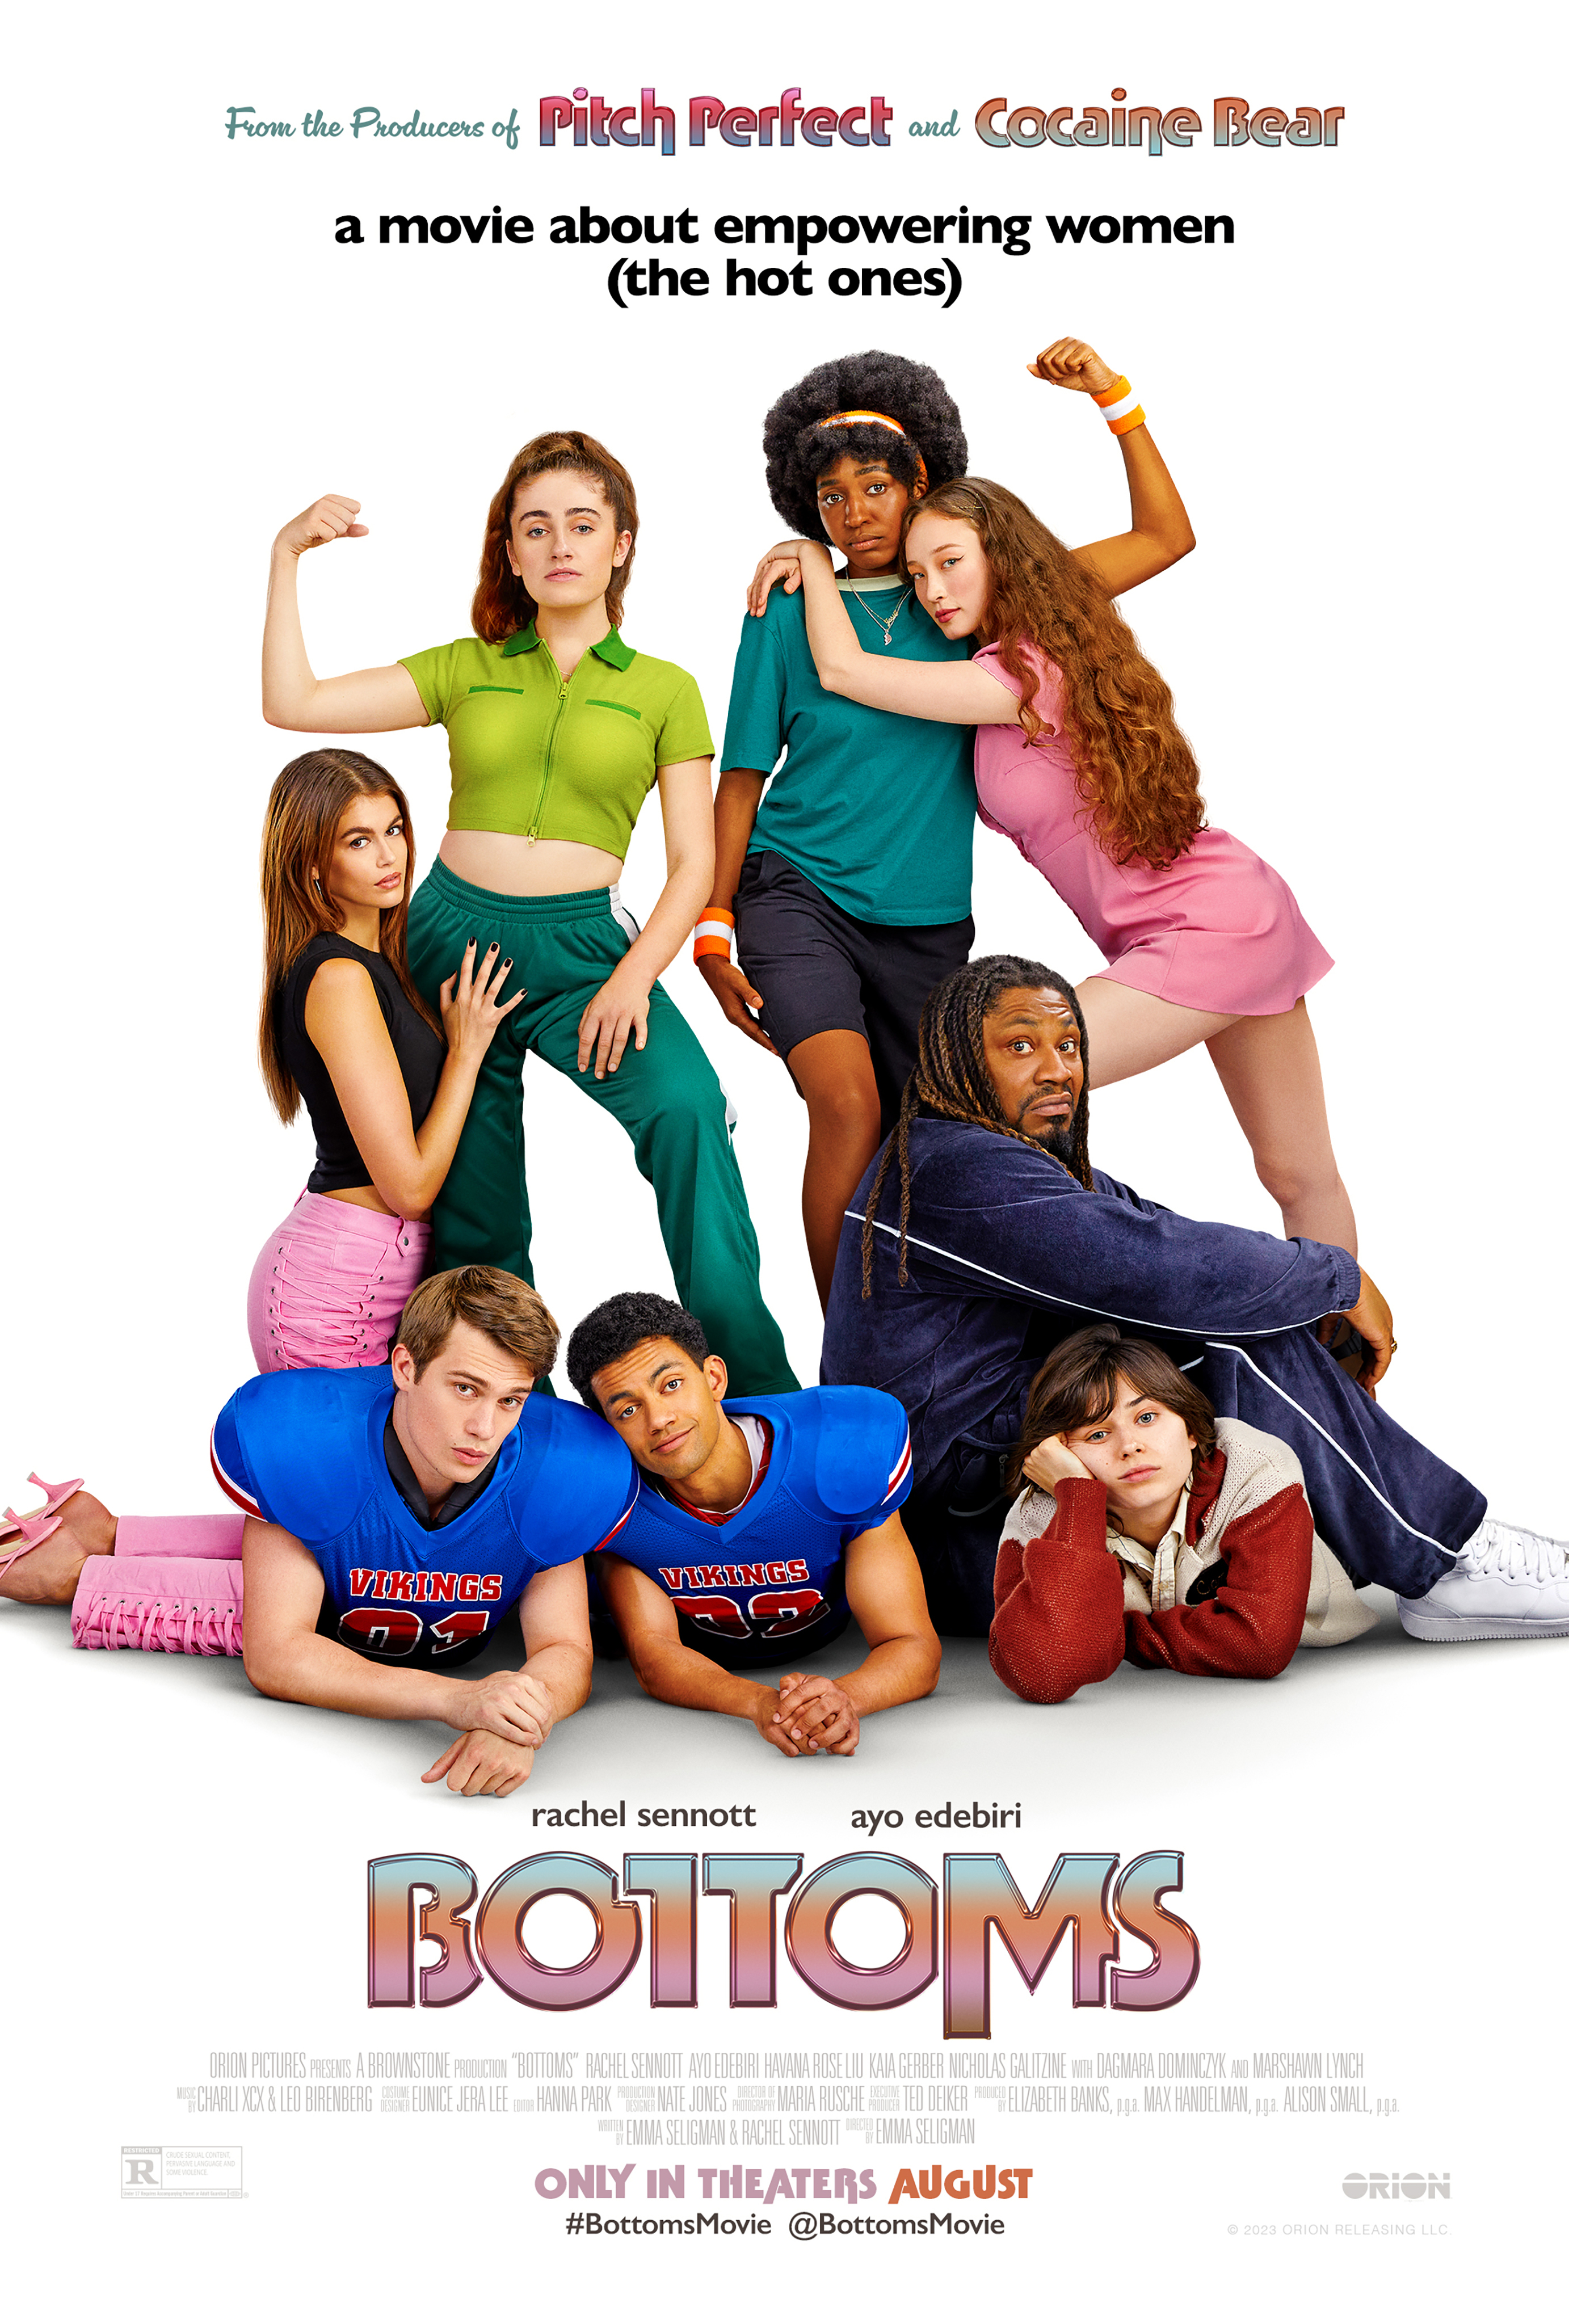 The Bottoms movie poster